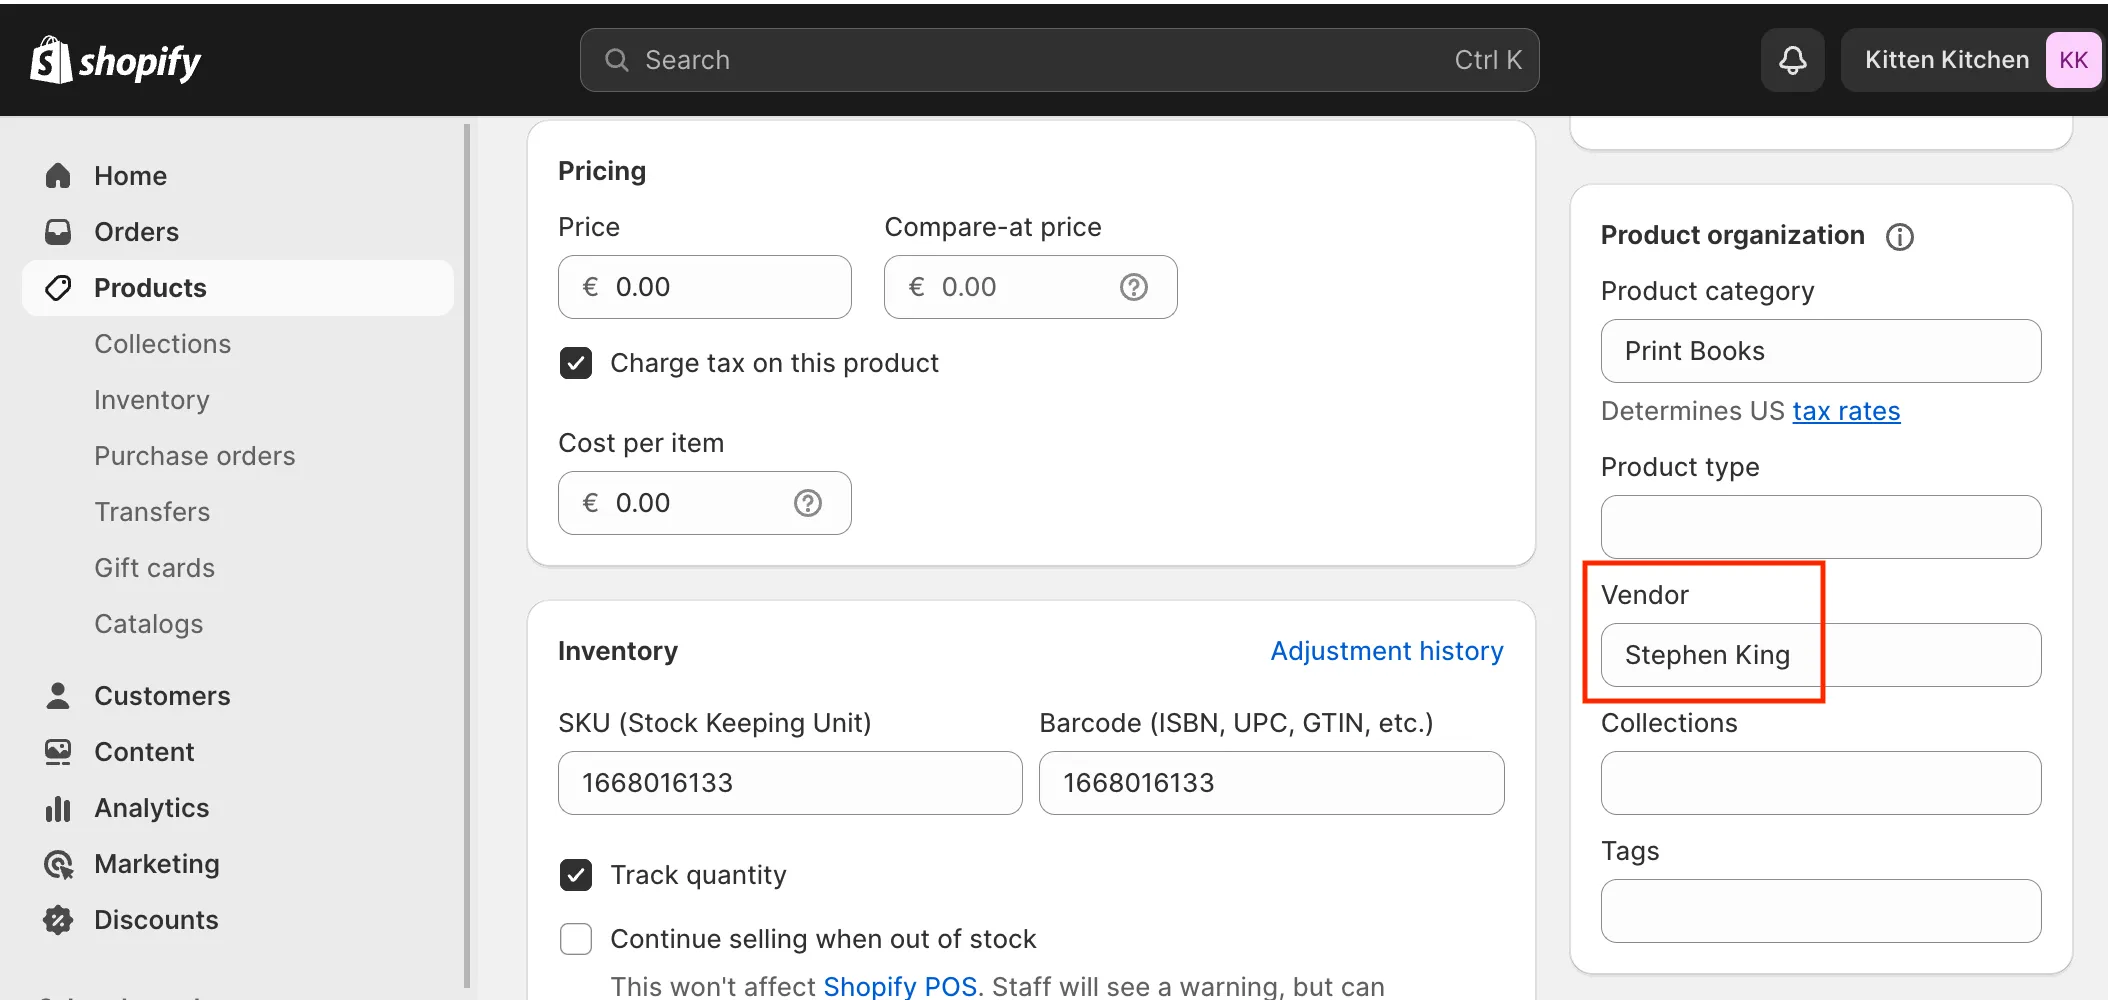 Shopify product form: book author in the vendor